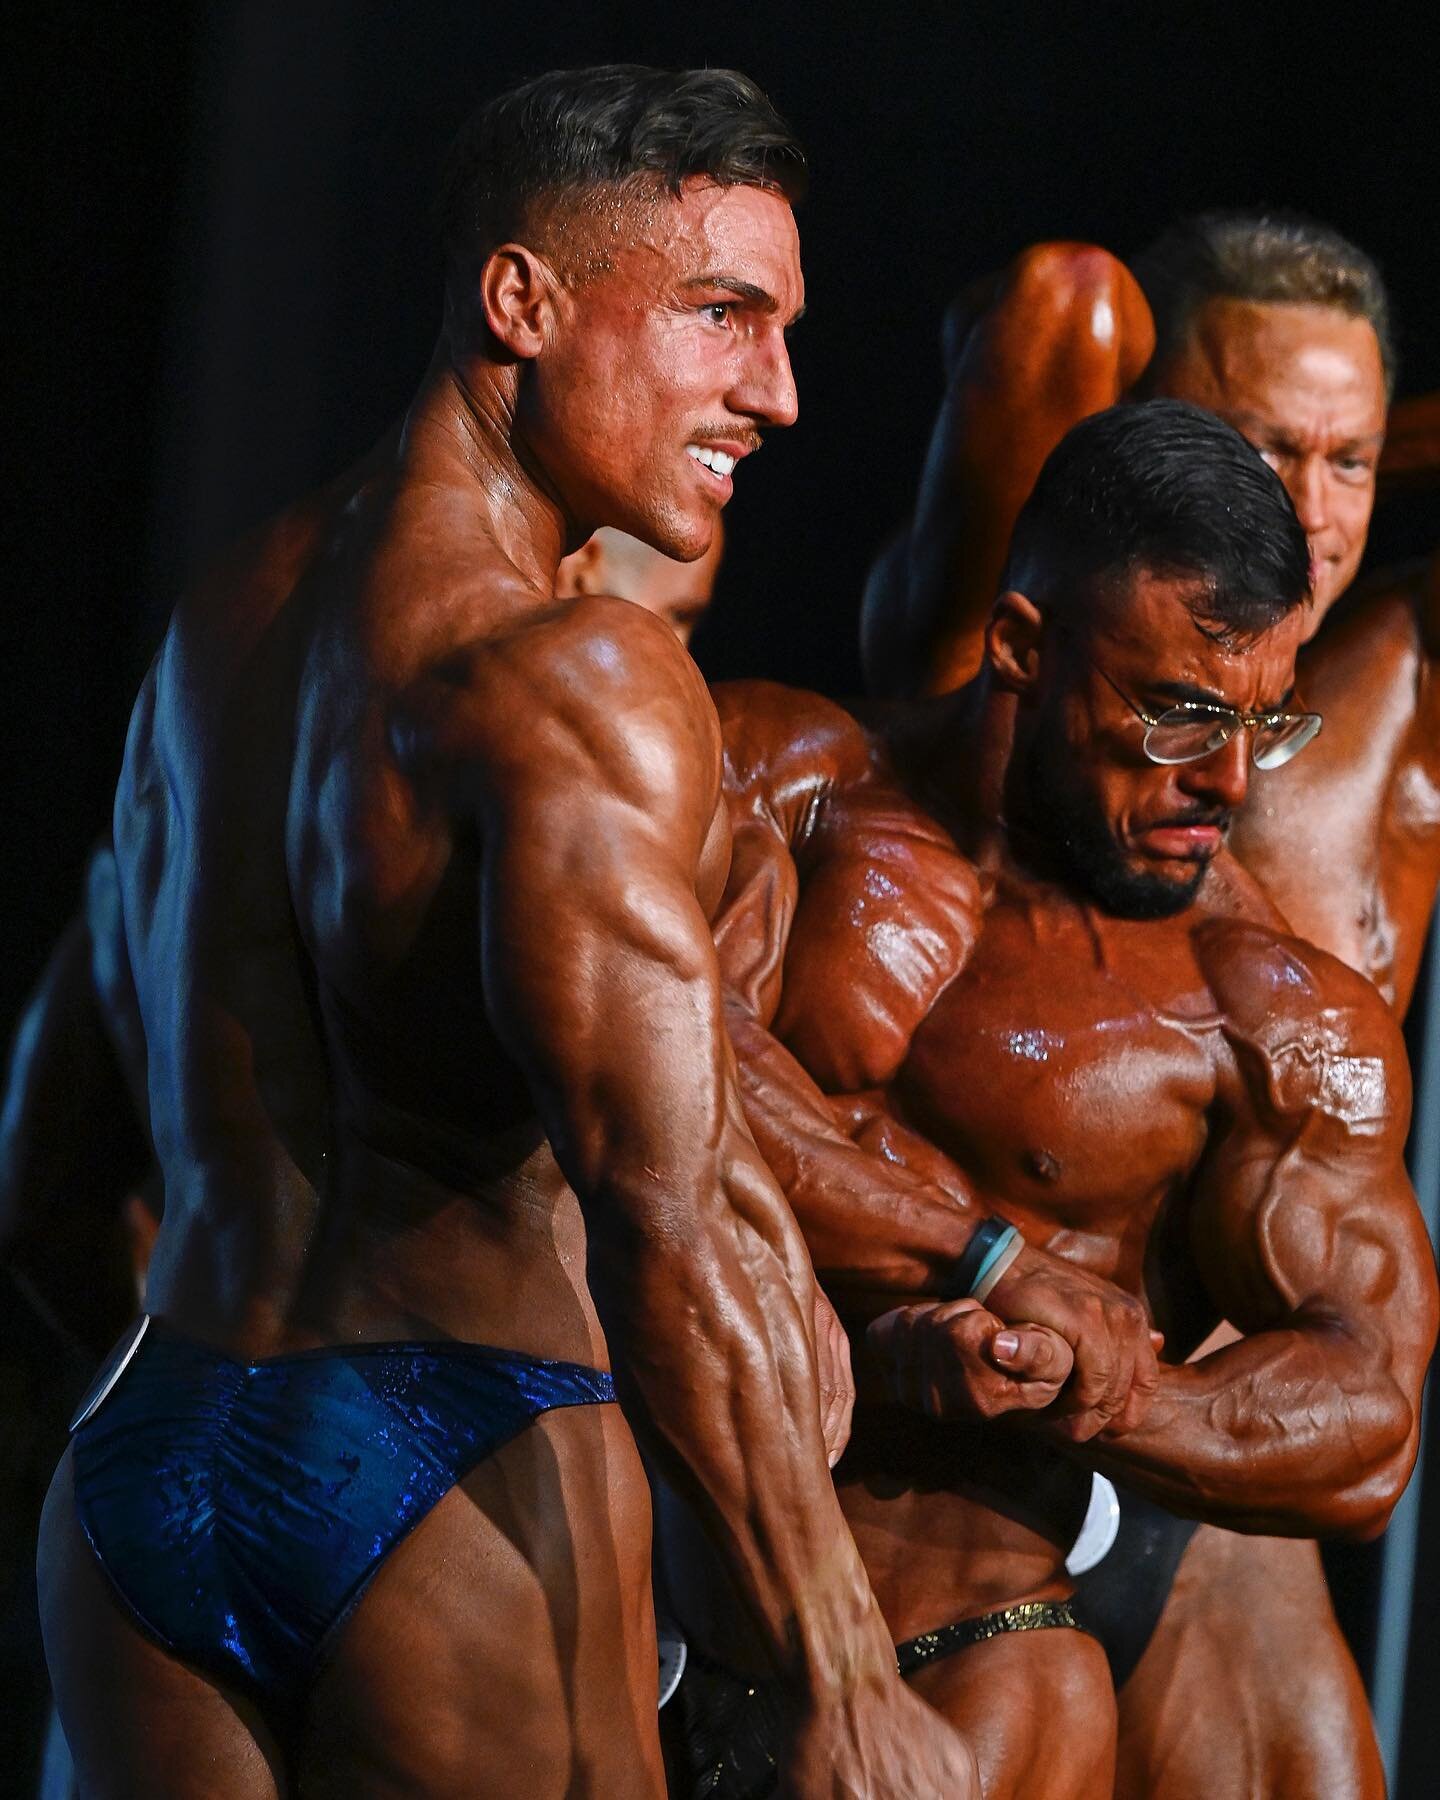 WNBF Worlds 32 Vegas 2021. Working hard to finish editing for you guys, but here&rsquo;s a teaser #wnbf #bodybuilding #fitspo #fitnessmotivation #naturalbodybuilding #america #lasvegas #vegas #workout #photography #inbf